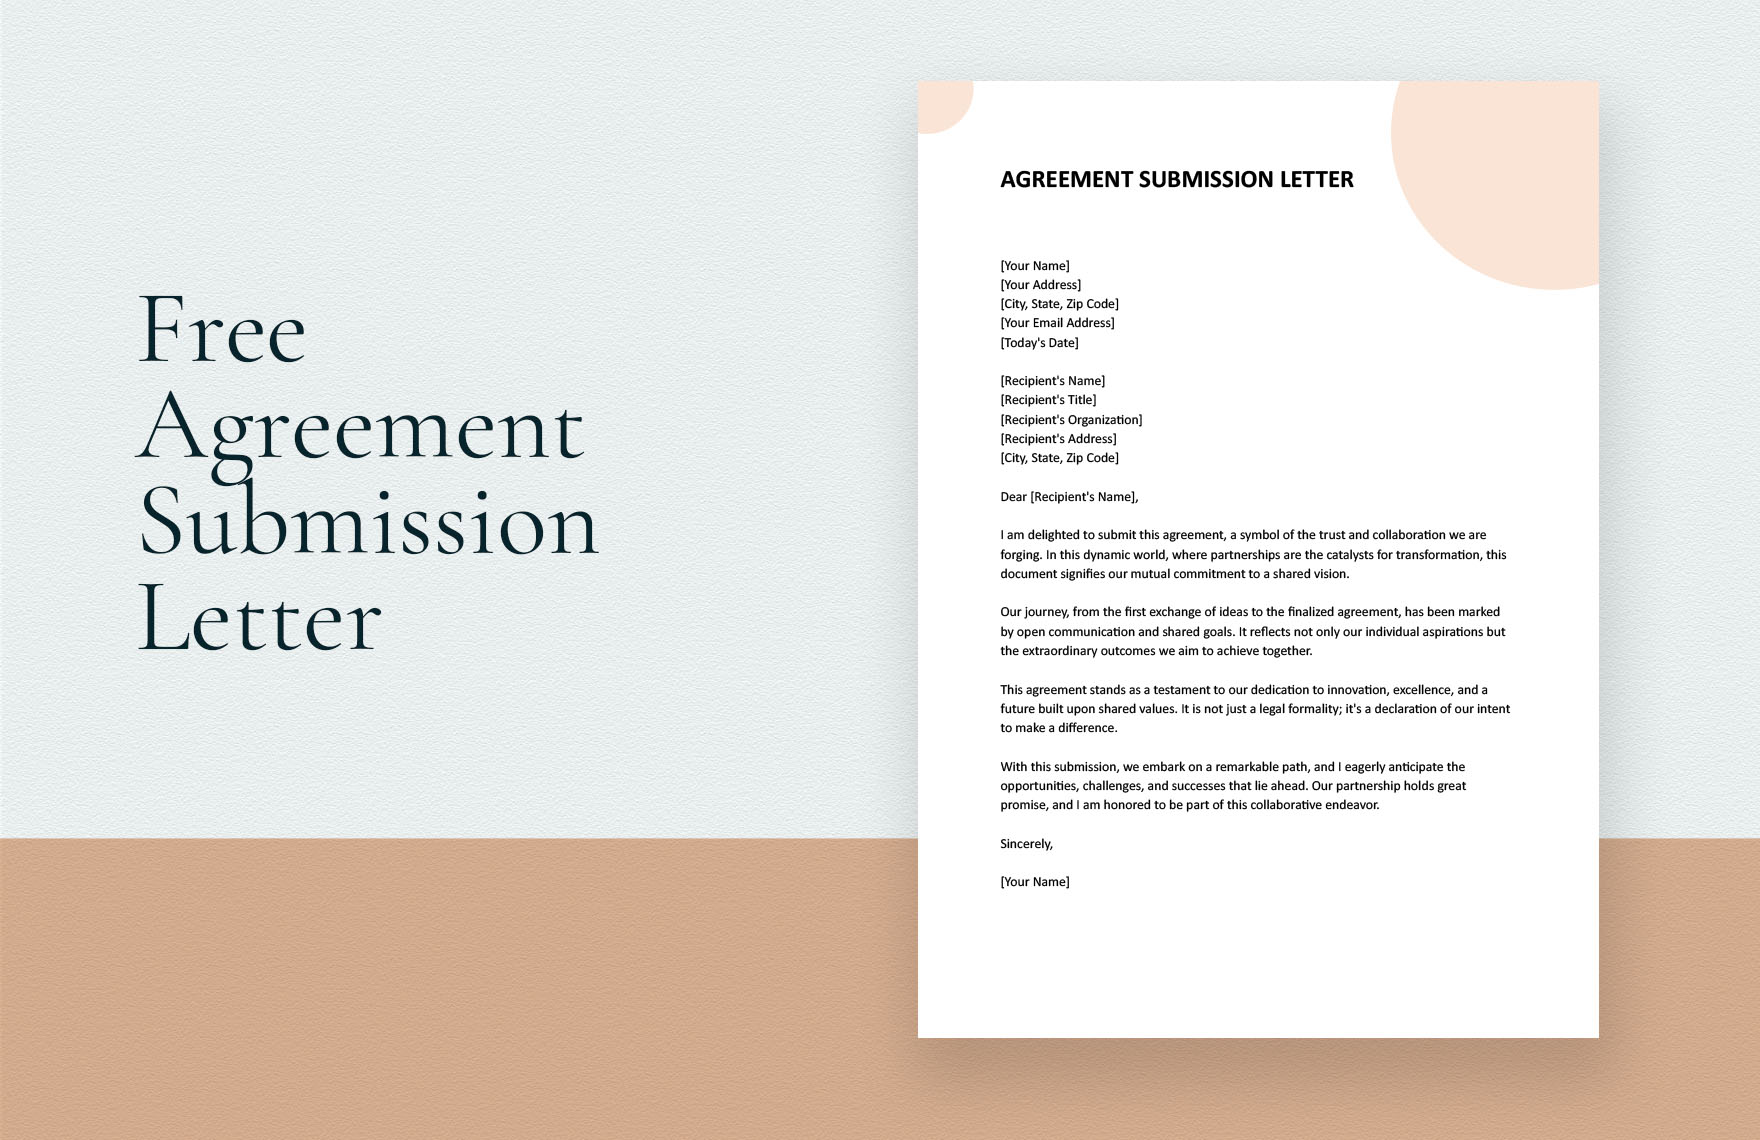 Agreement Submission Letter in Word, Google Docs